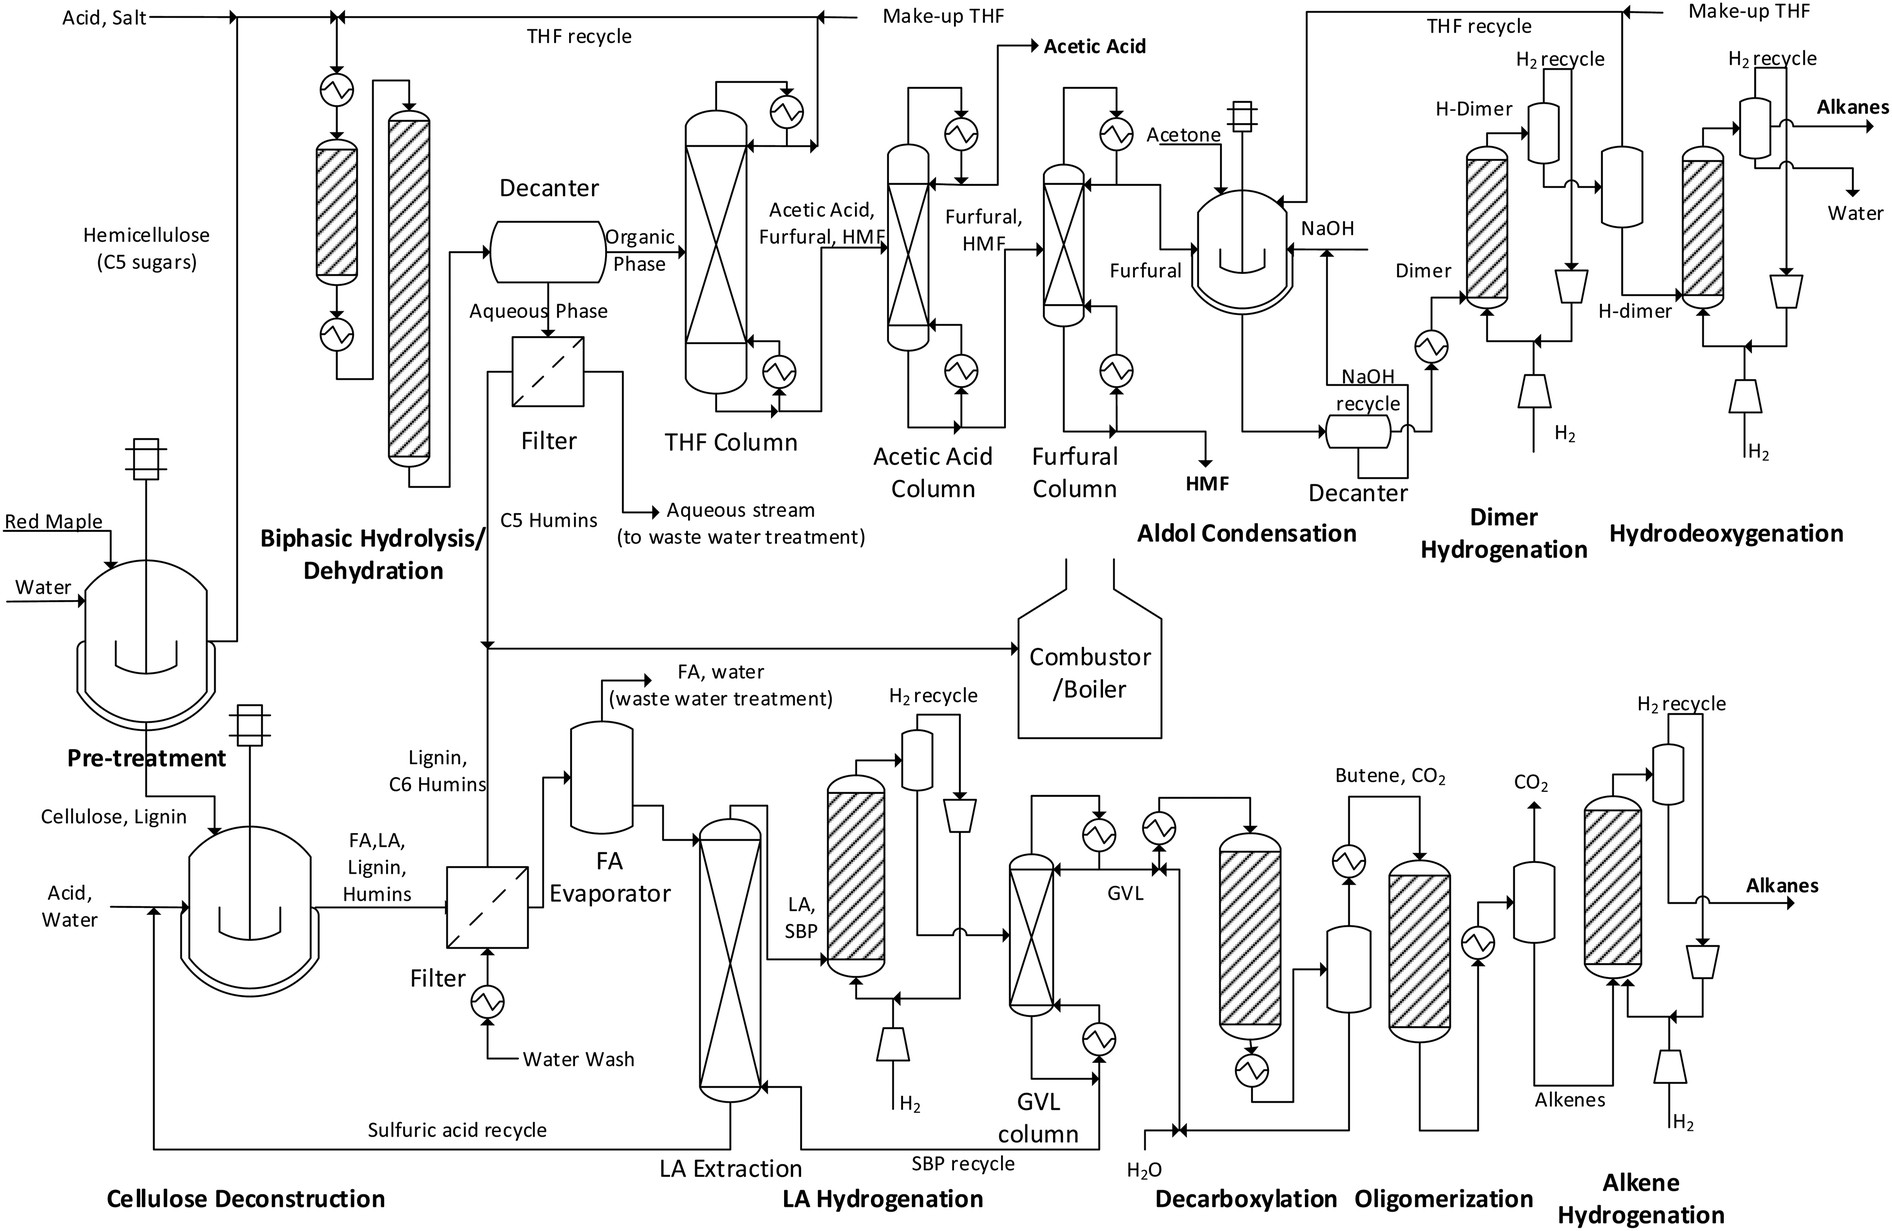 Process Flow Diagram Chemical Engineering Production Of Renewable Jet Fuel Range Alkanes and Modity Of Process Flow Diagram Chemical Engineering